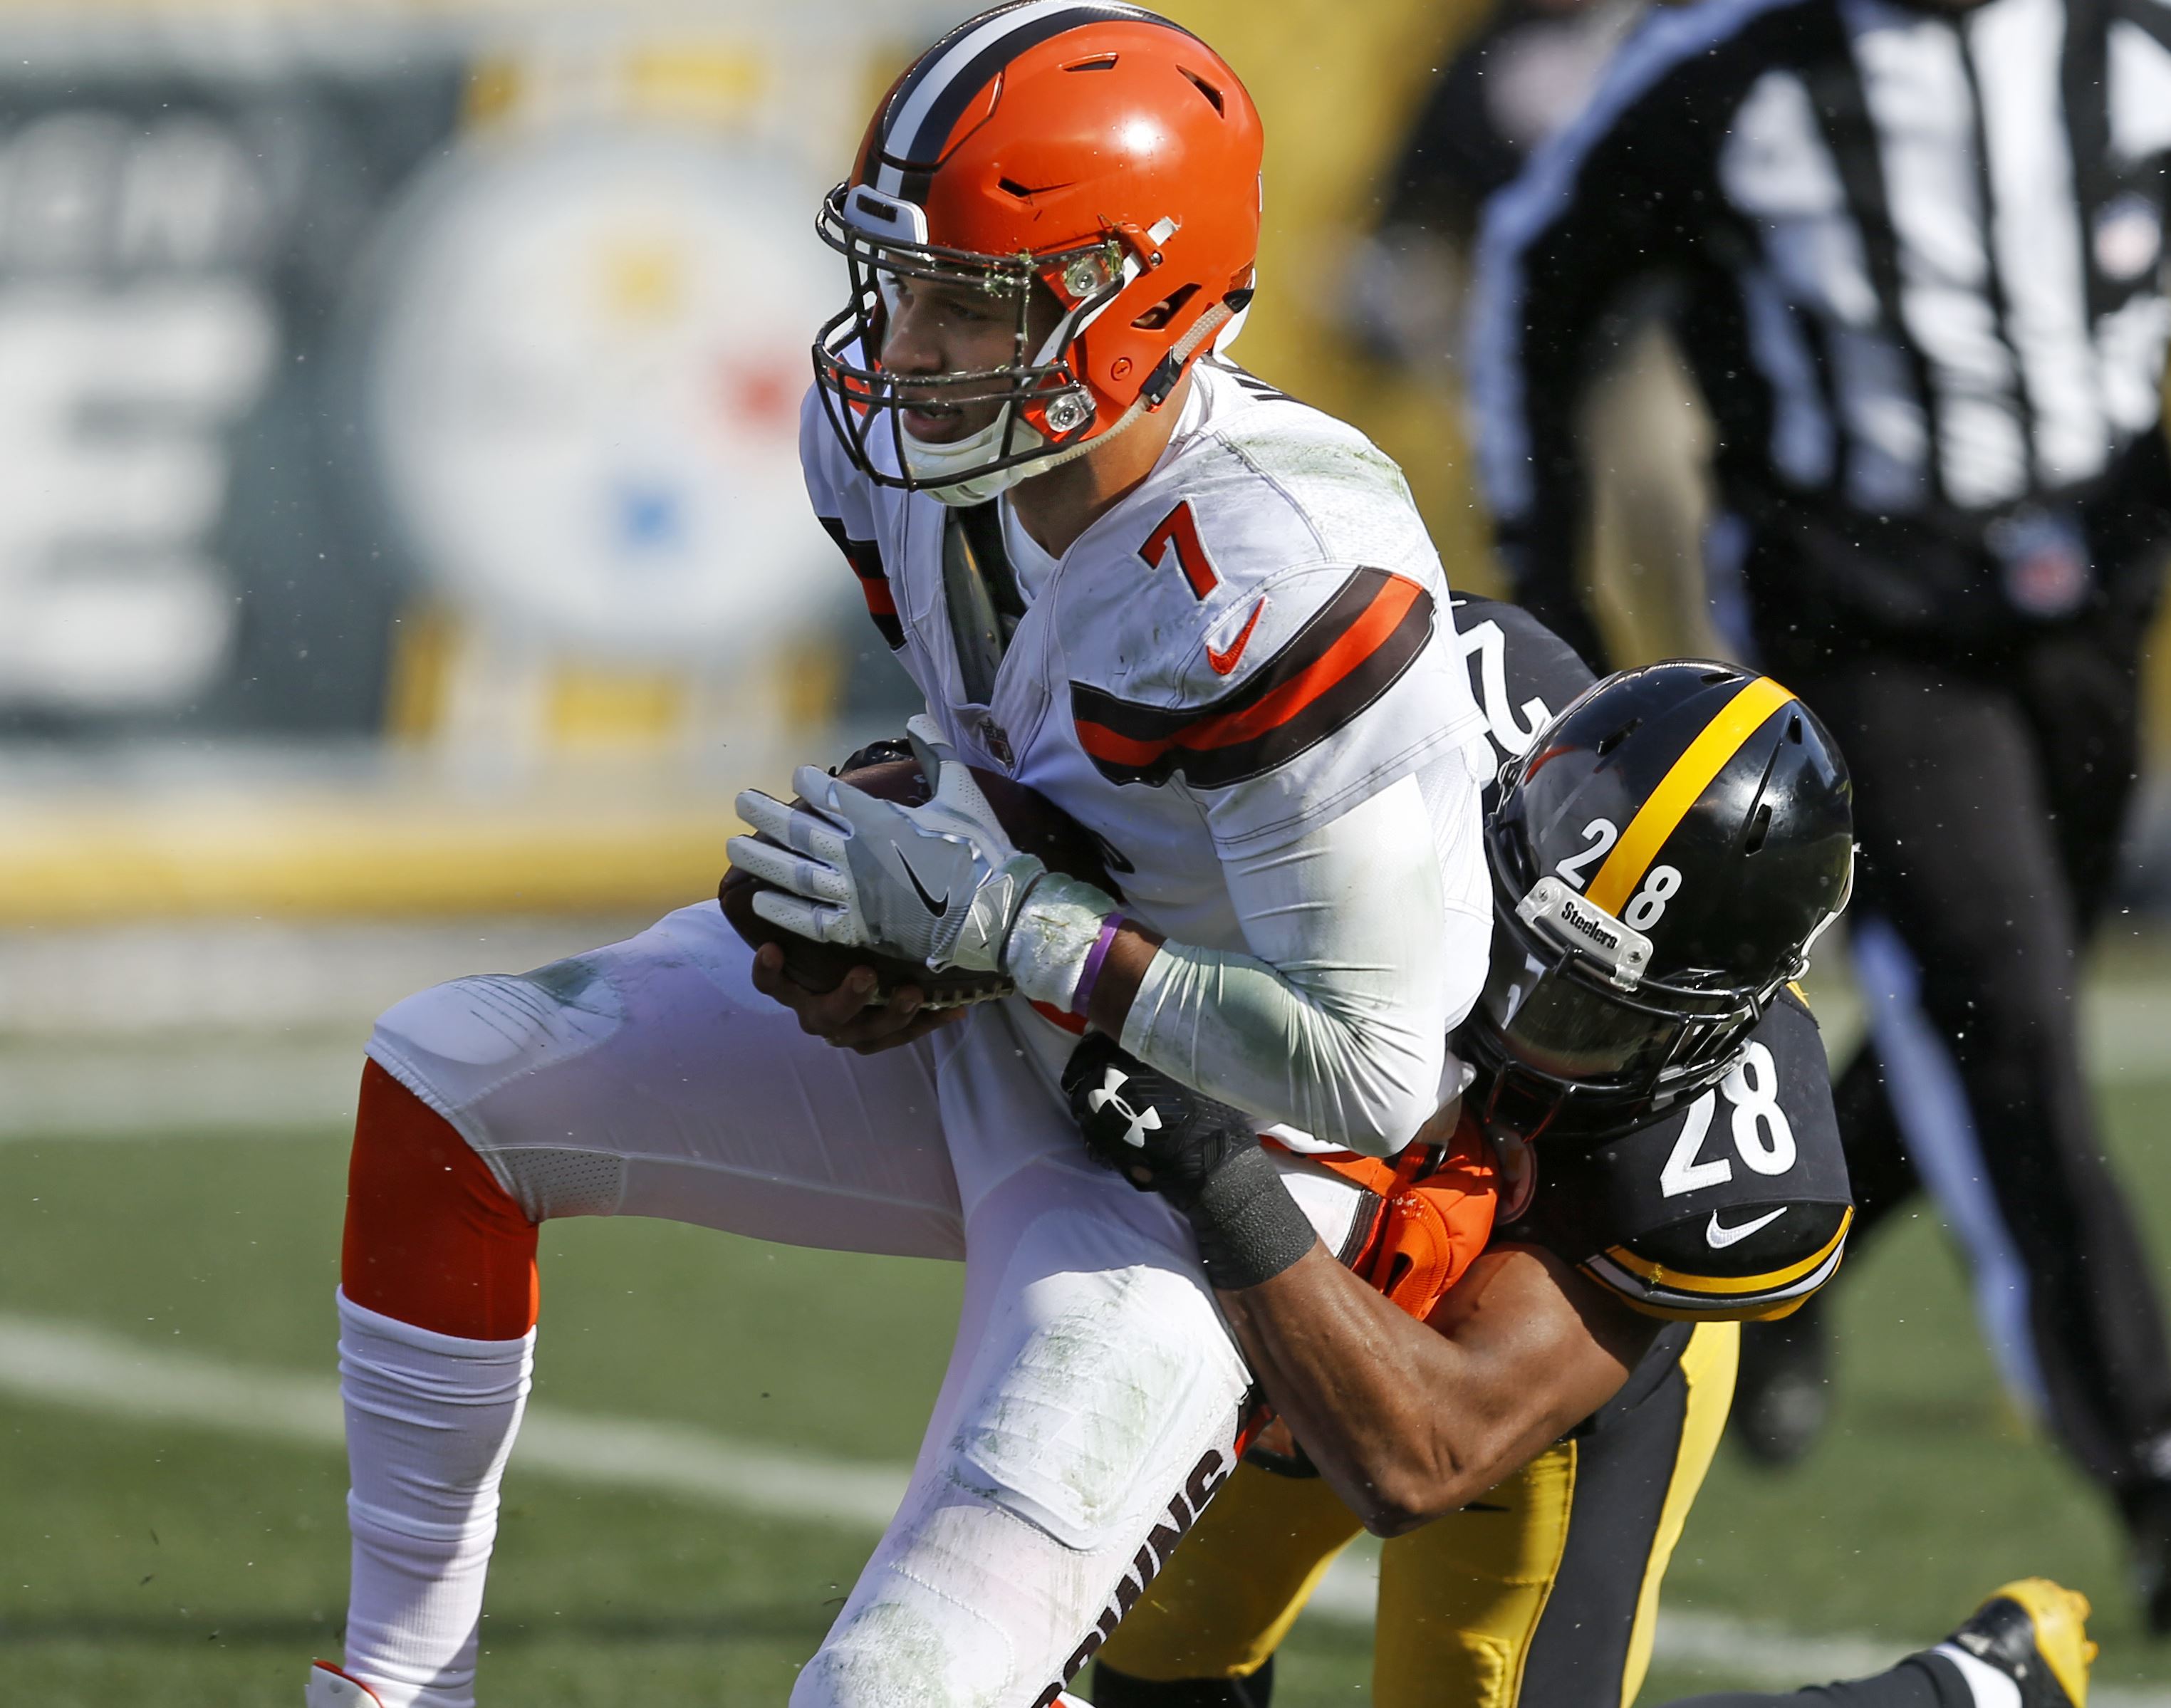 Browns finish winless after 28-24 loss to Steelers - The Blade